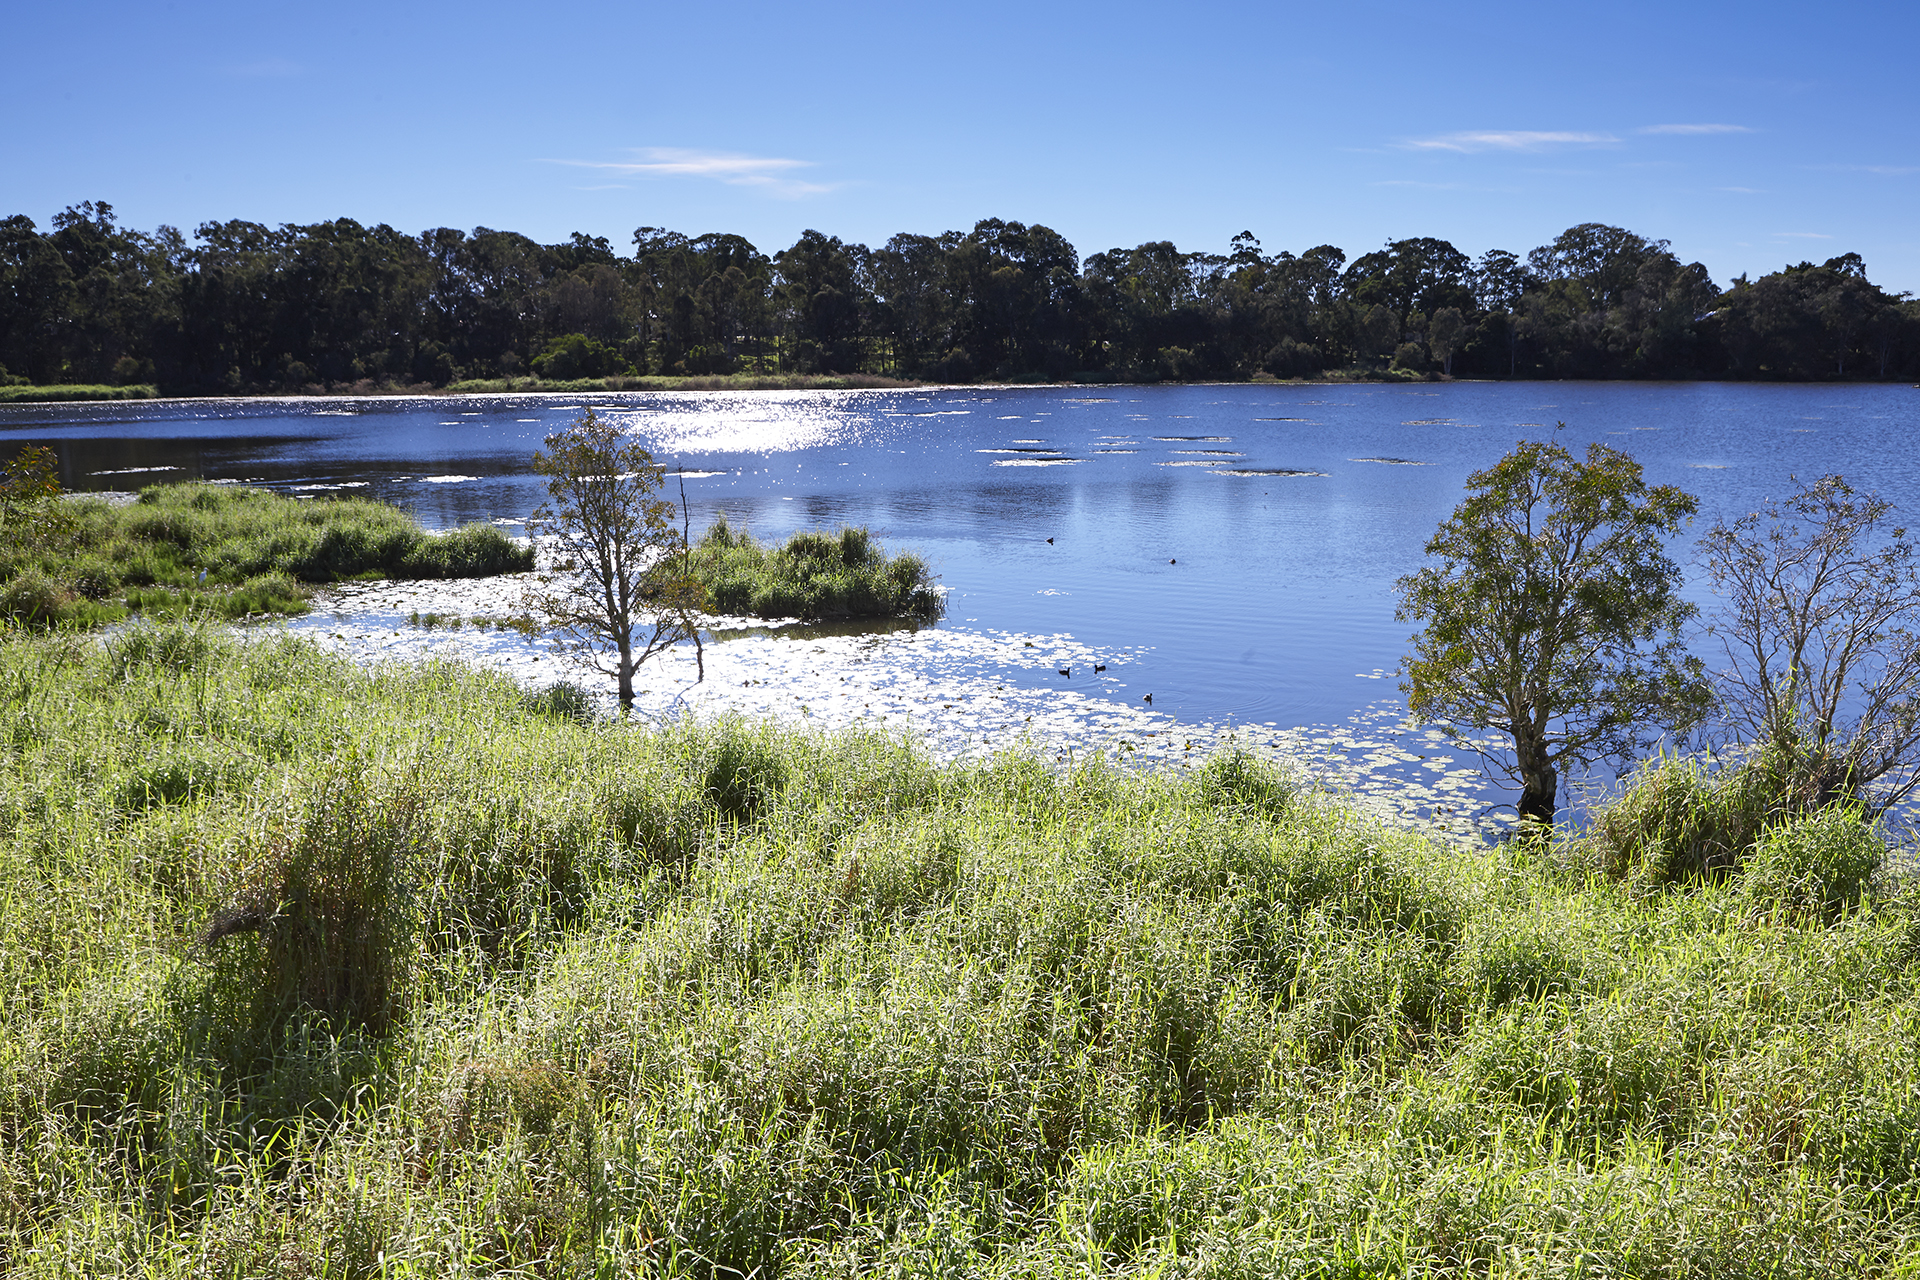 This is an image of the heritage place known as Dowse Lagoon